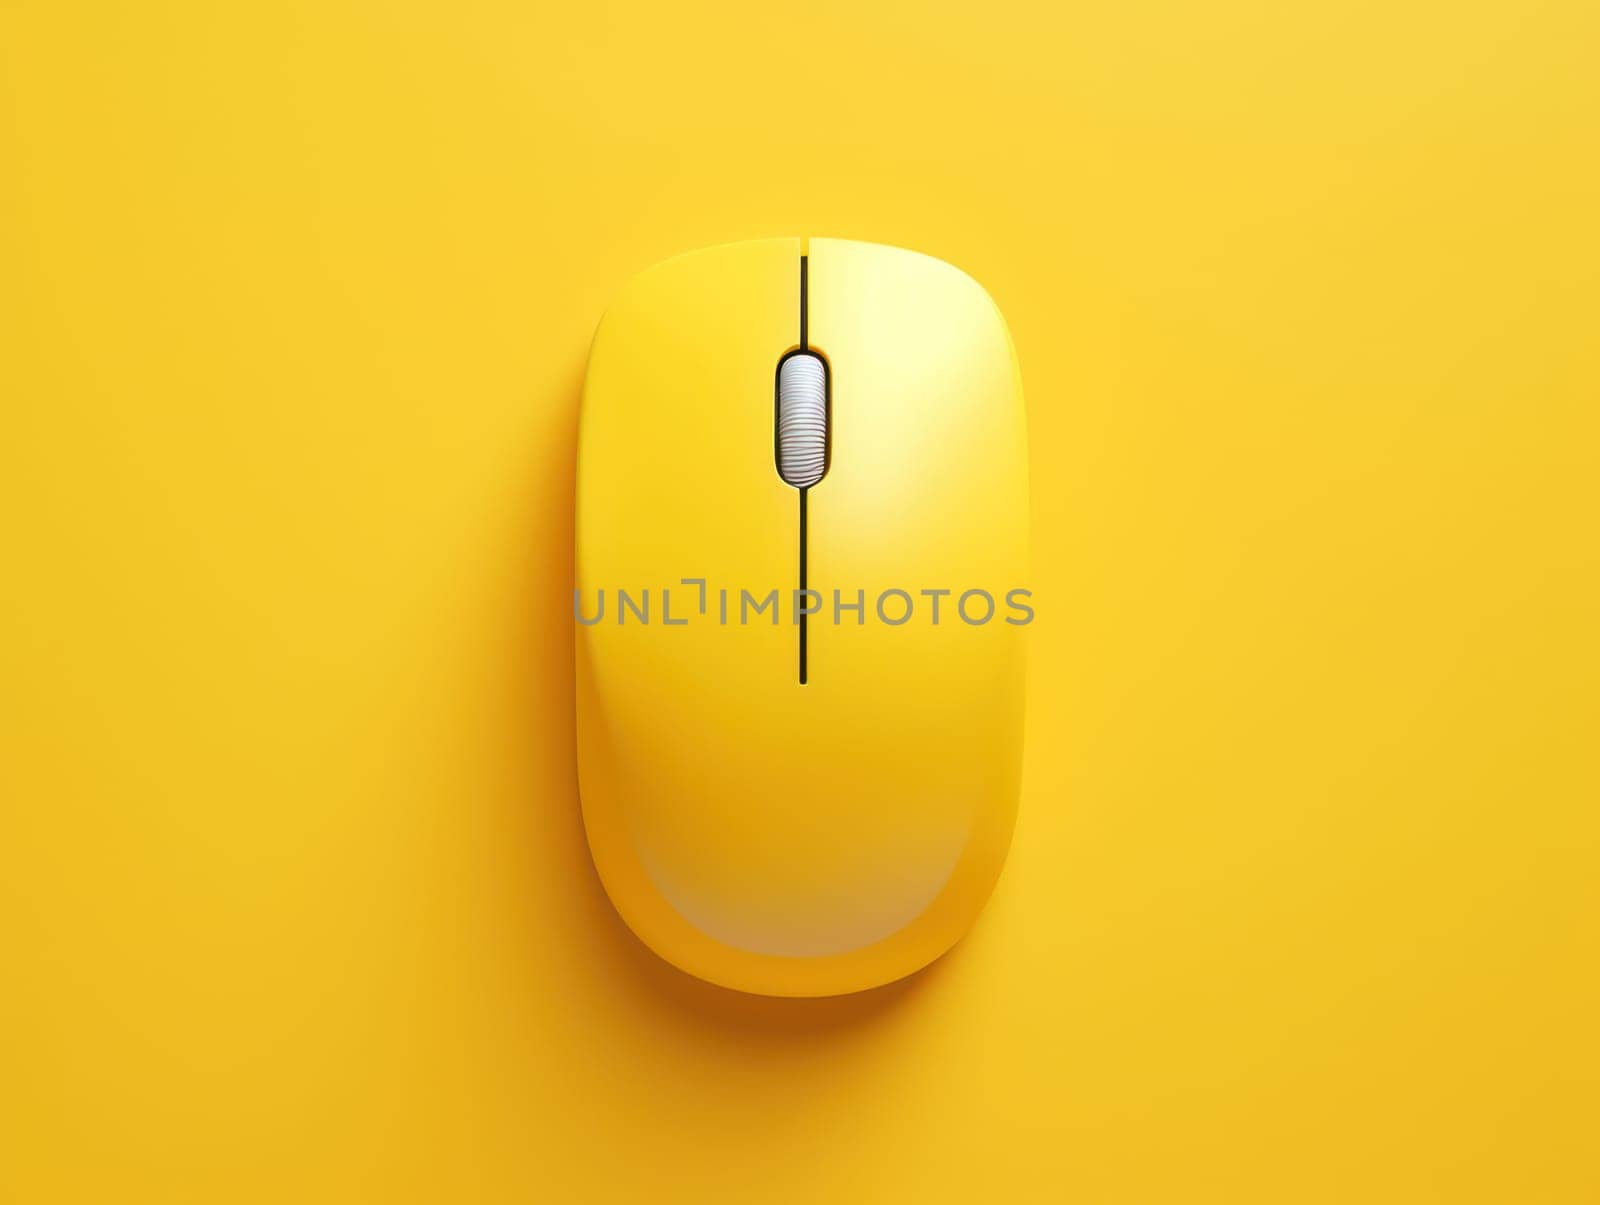 Modern Minimalist Computer Mouse on White Background, a Technology Device for Efficient Business Communication and Work by Vichizh